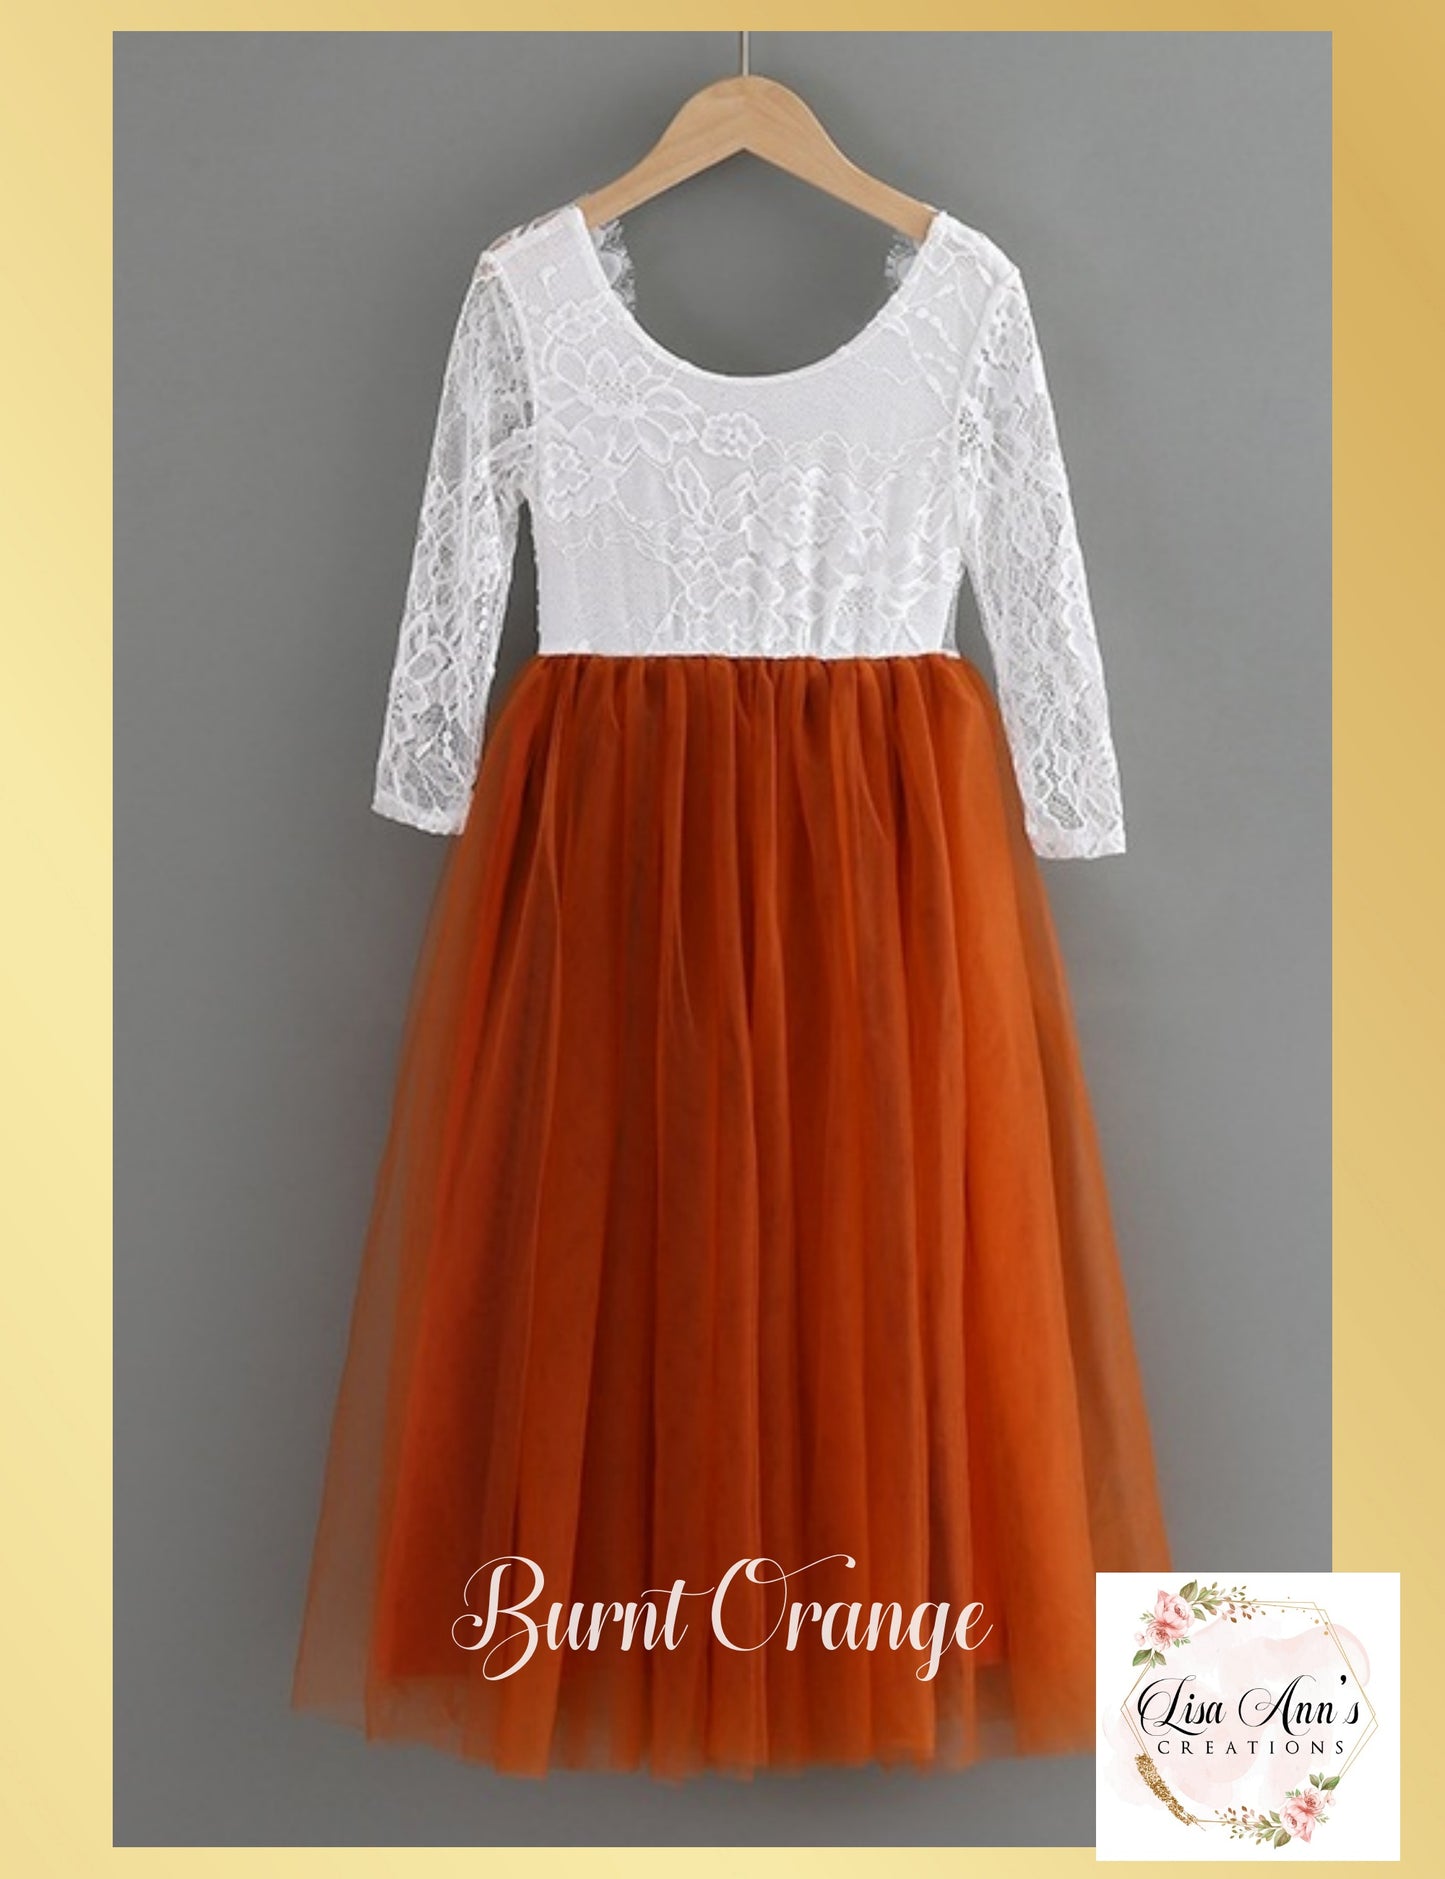 Burnt Orange Flower girl dress with long sleeves in white lace